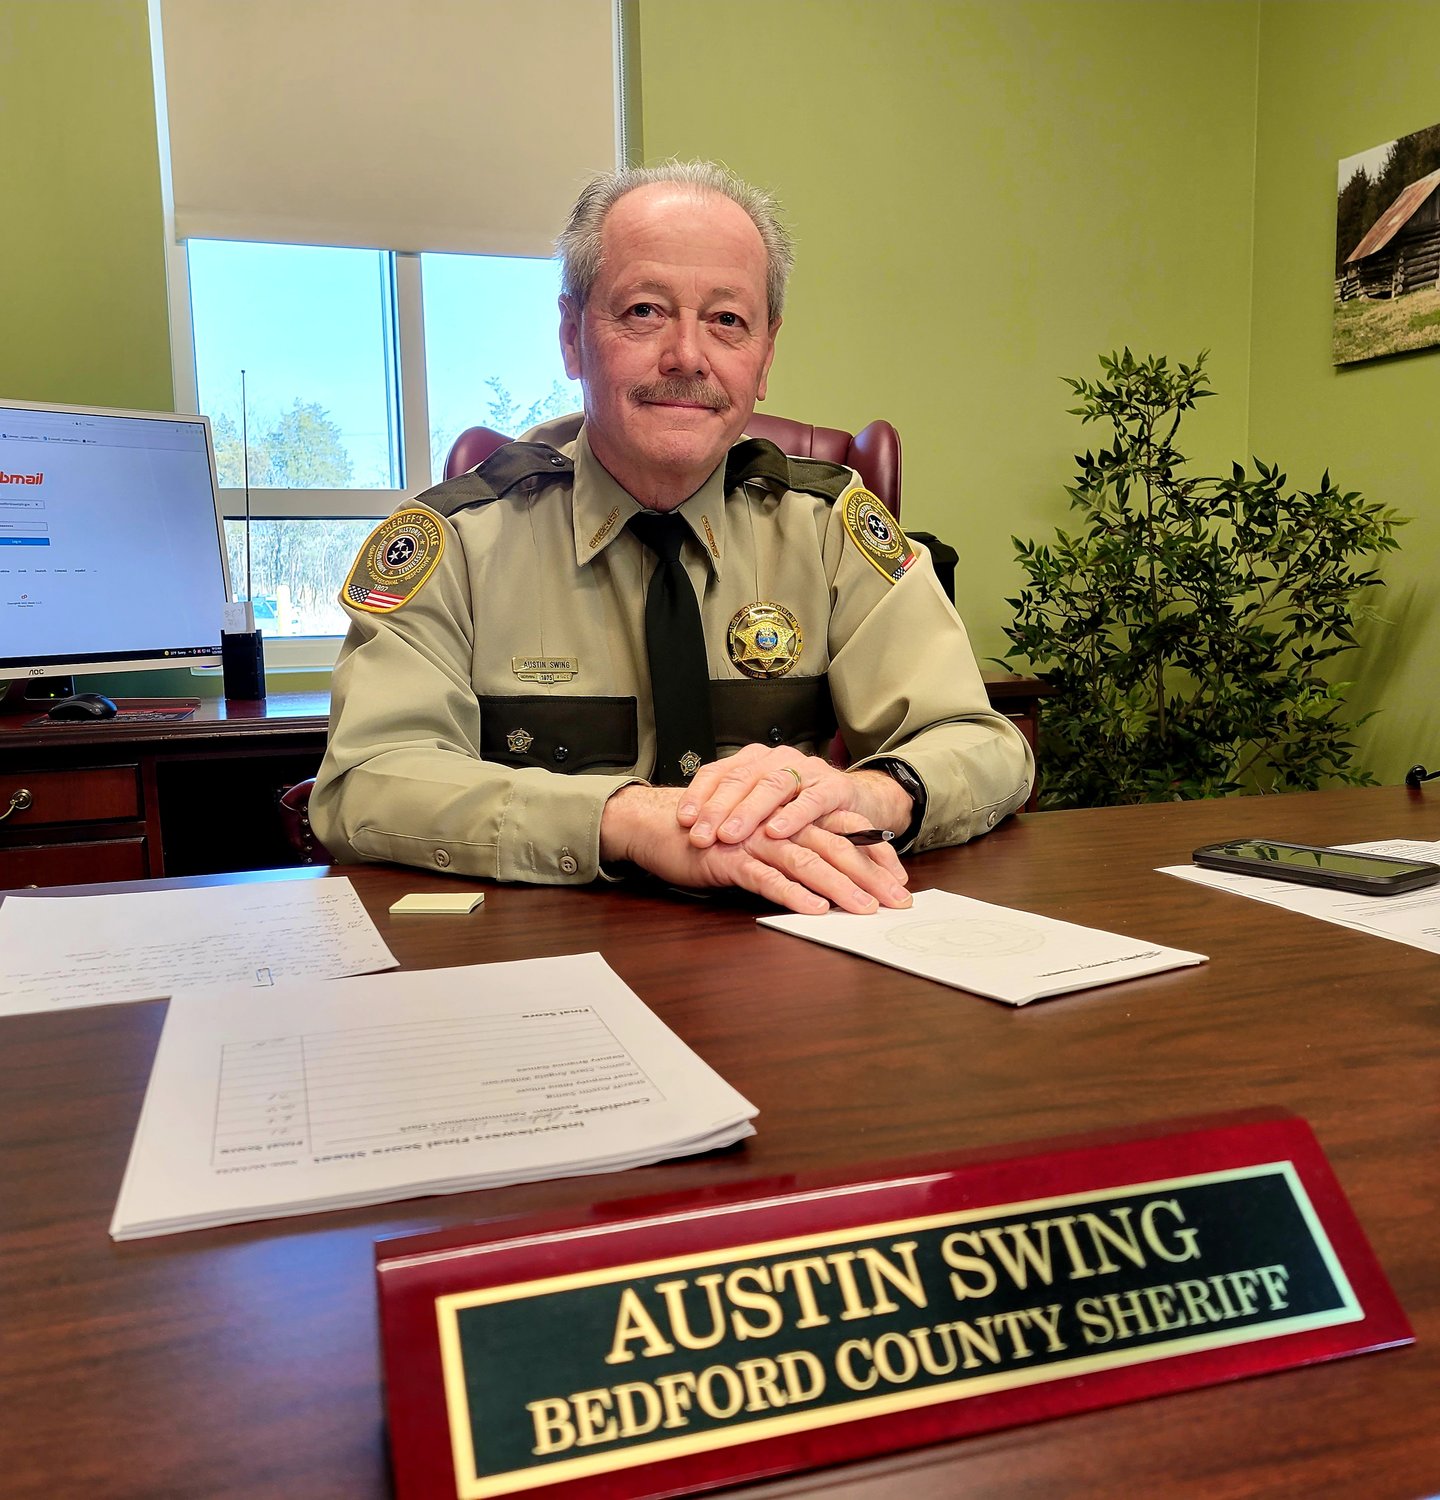 Austin Swing was elected Bedford County sheriff in 2014 and 2018 after serving 21
years as the Shelbyville Police Chief.